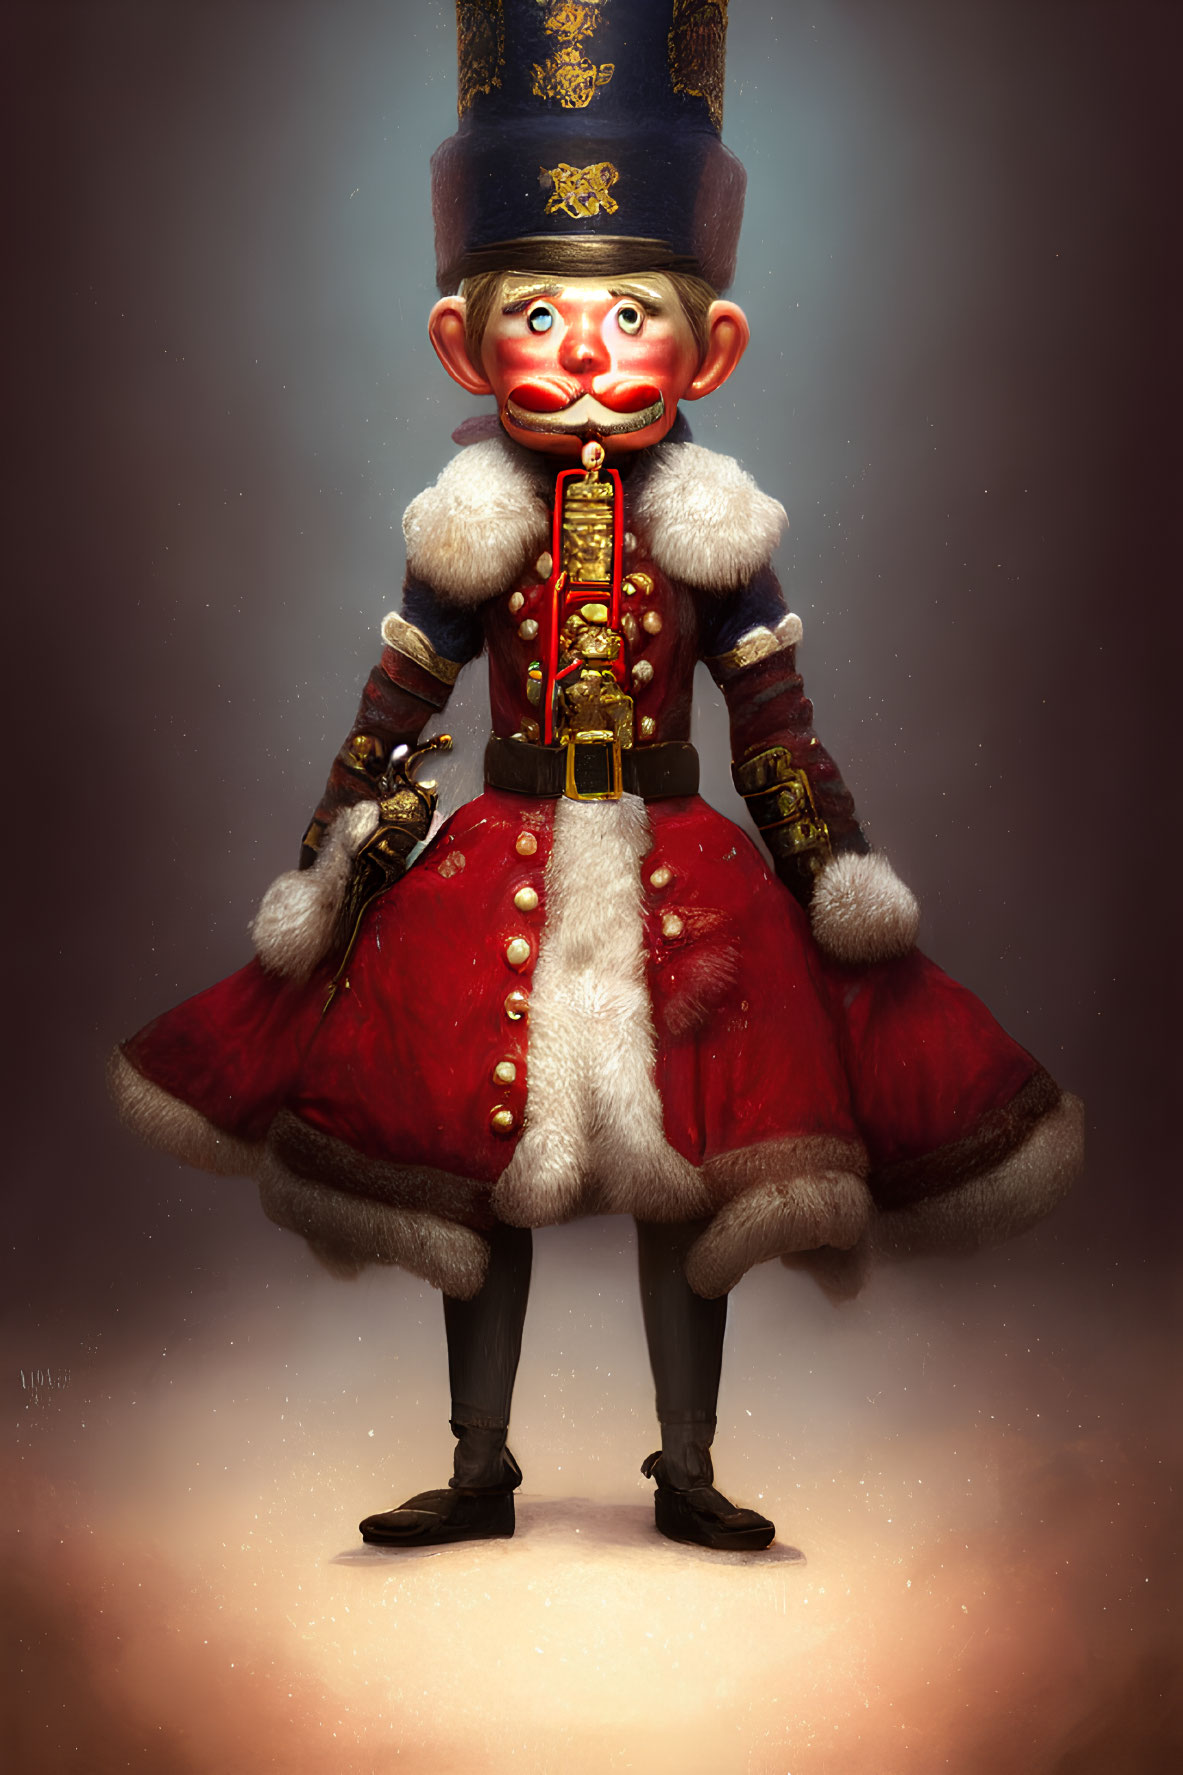 Animated Nutcracker Character in Red and Gold Uniform